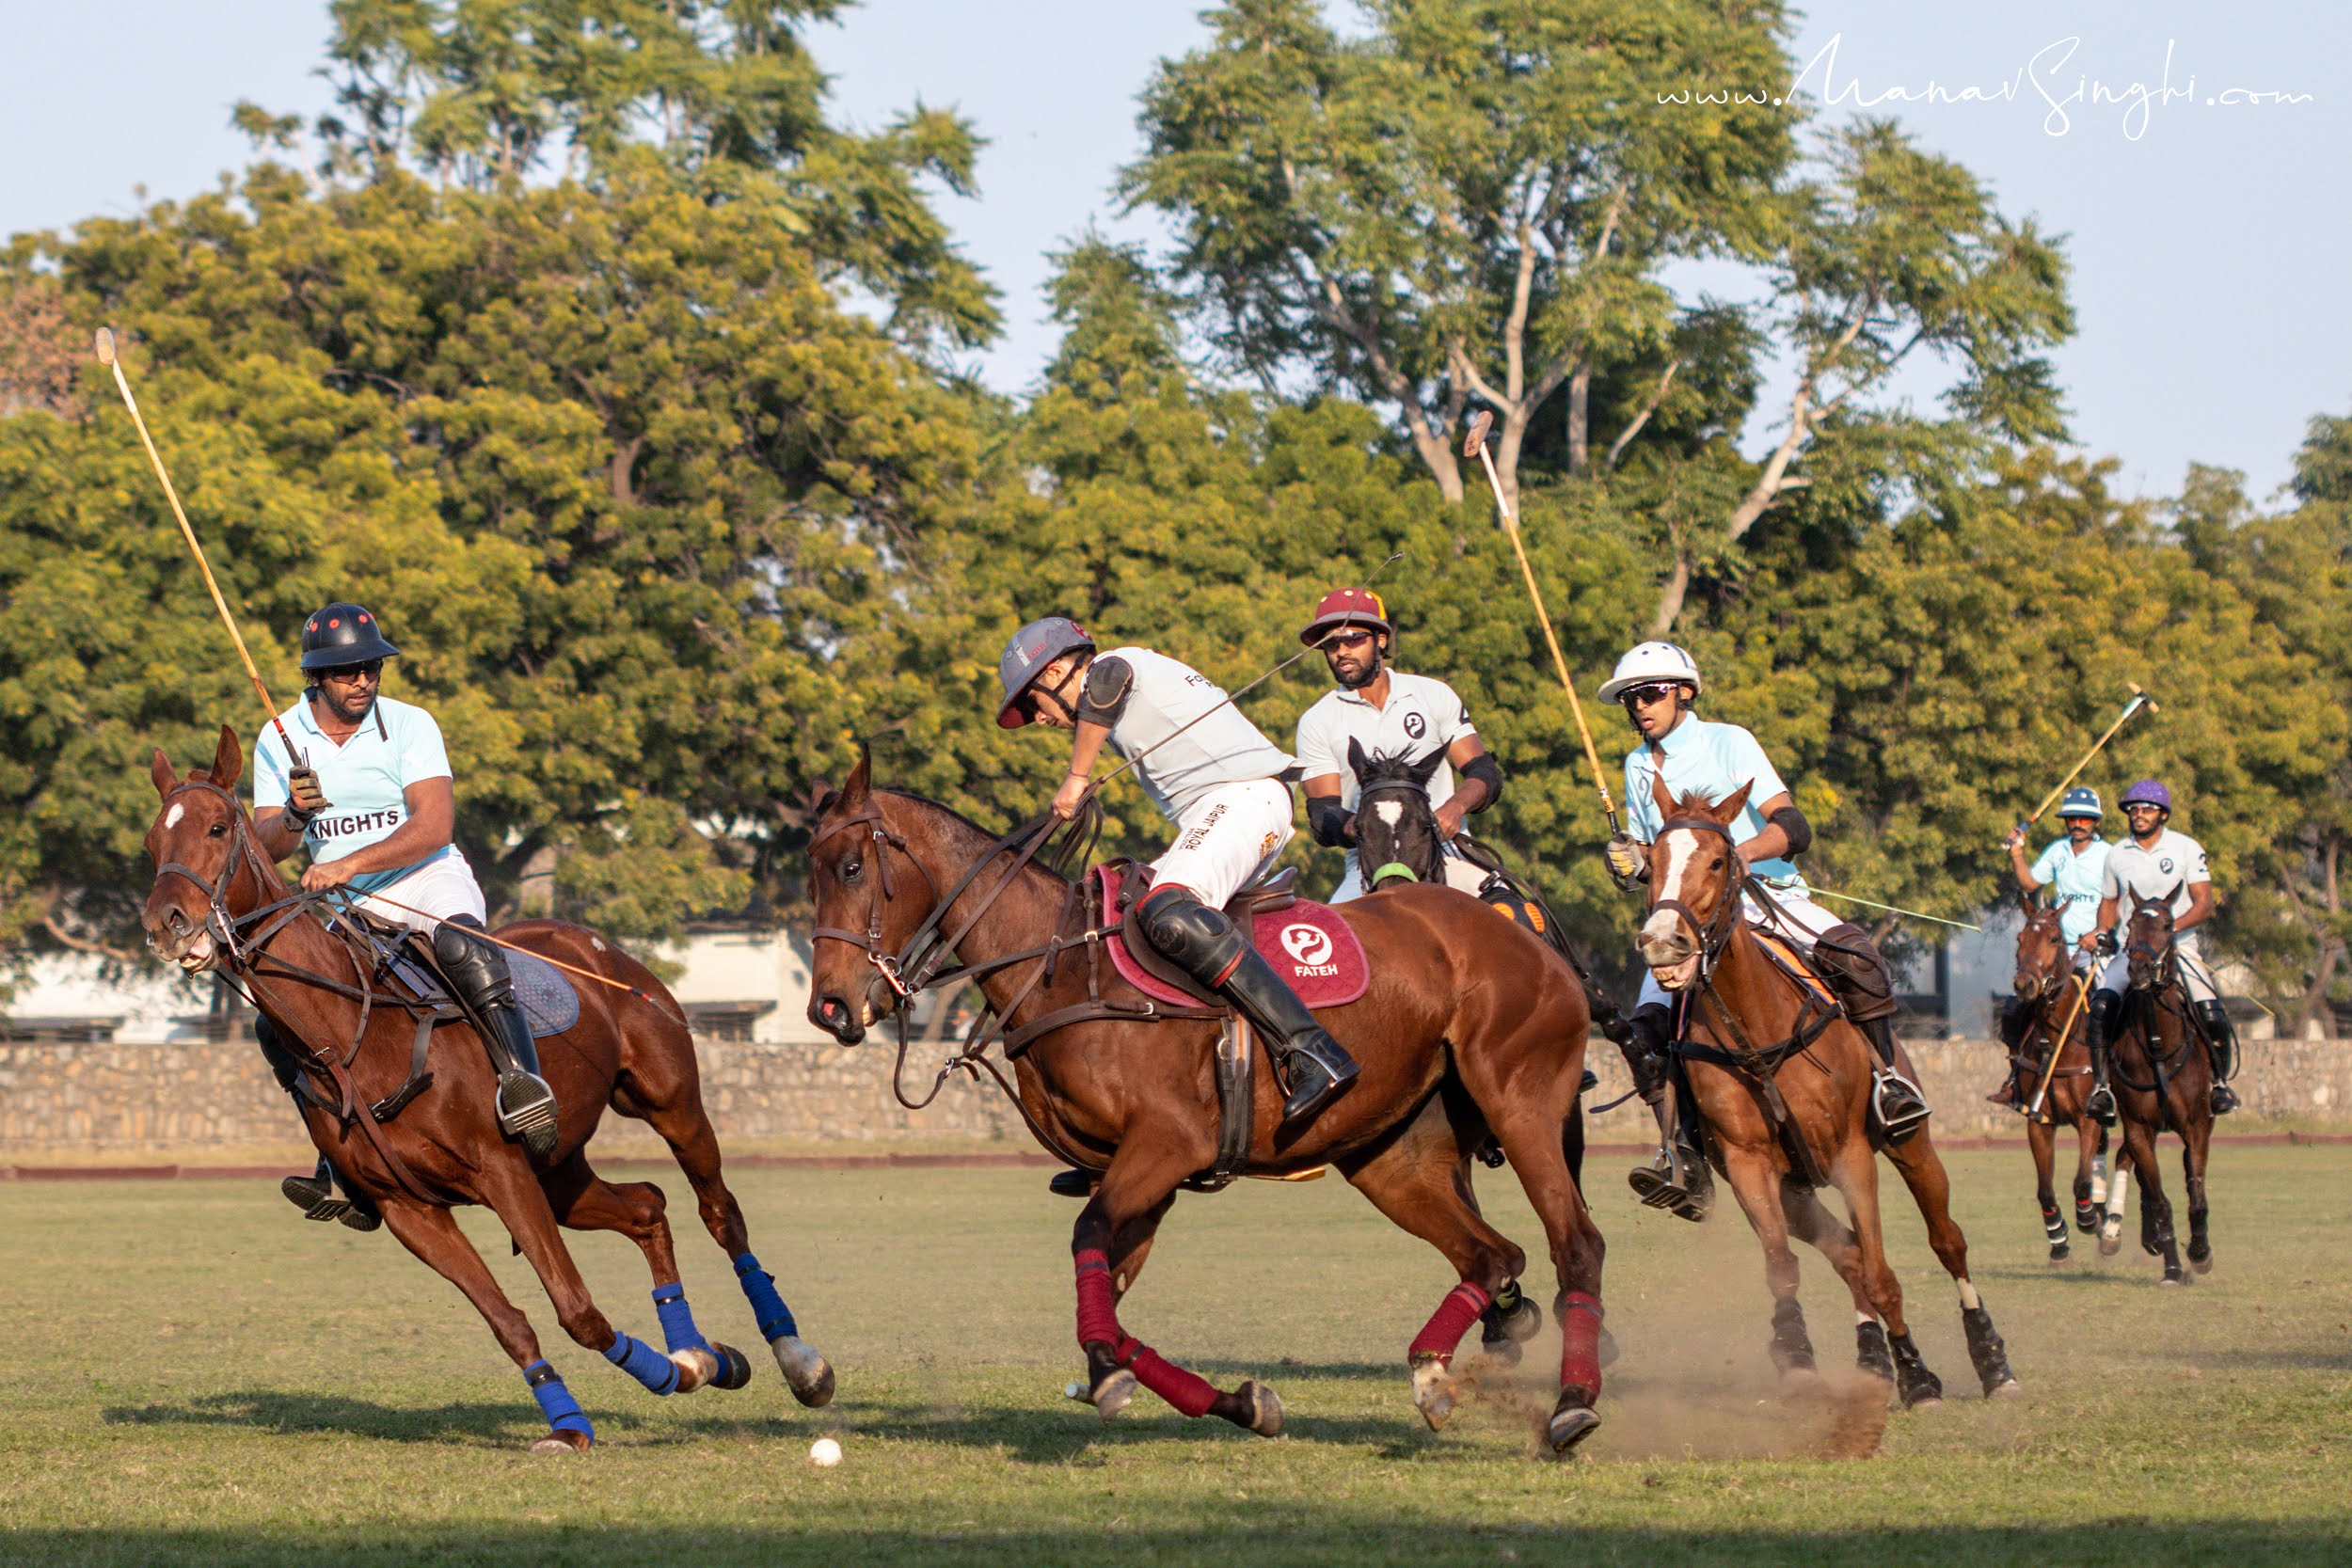 Rajasthan Polo Club Cup - Day 2 - Fateh Couture vs Knights